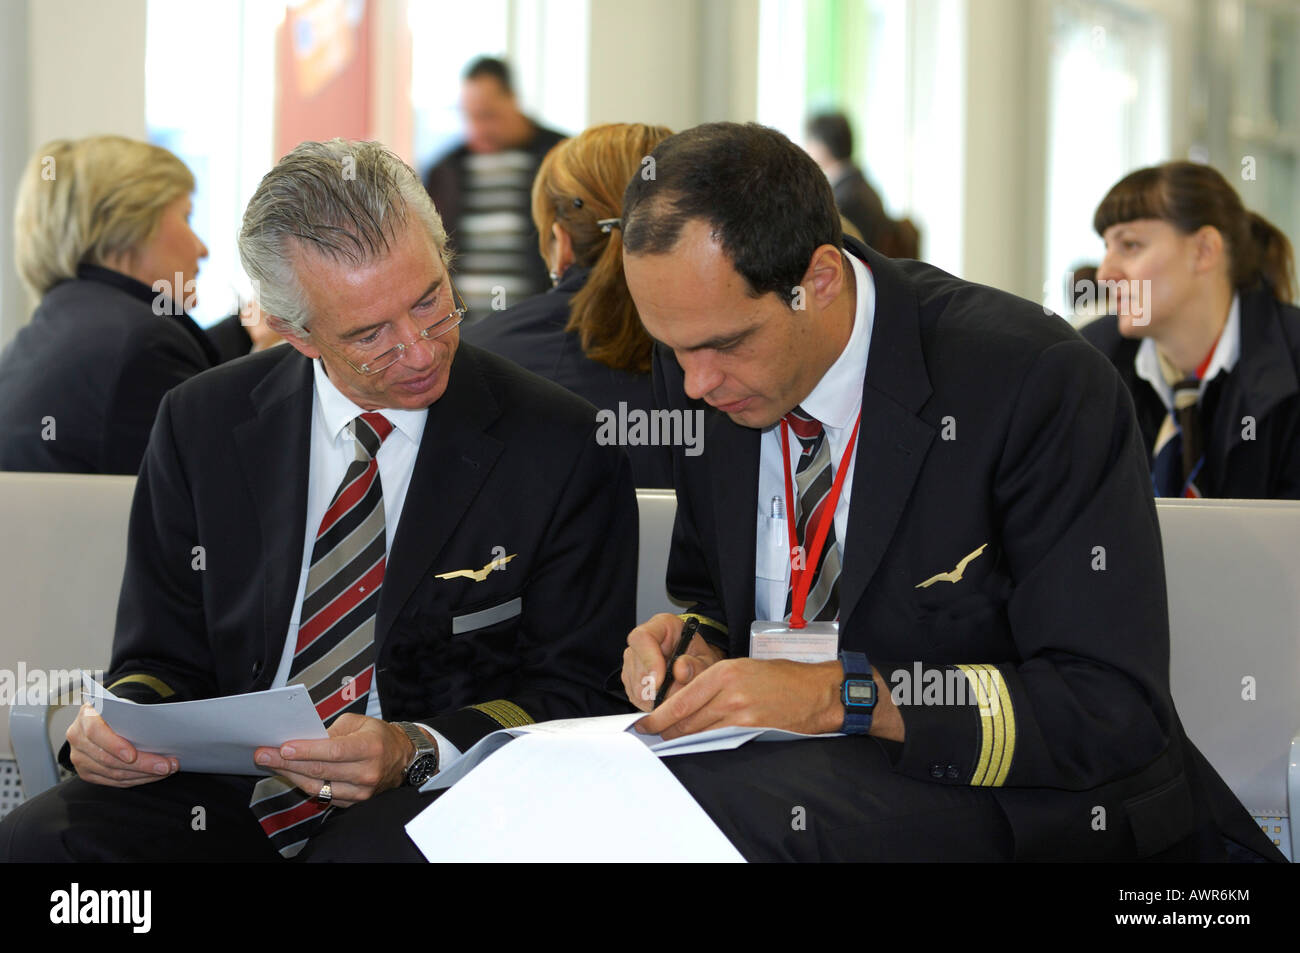 Pilots during briefing, departure lounge Stock Photo